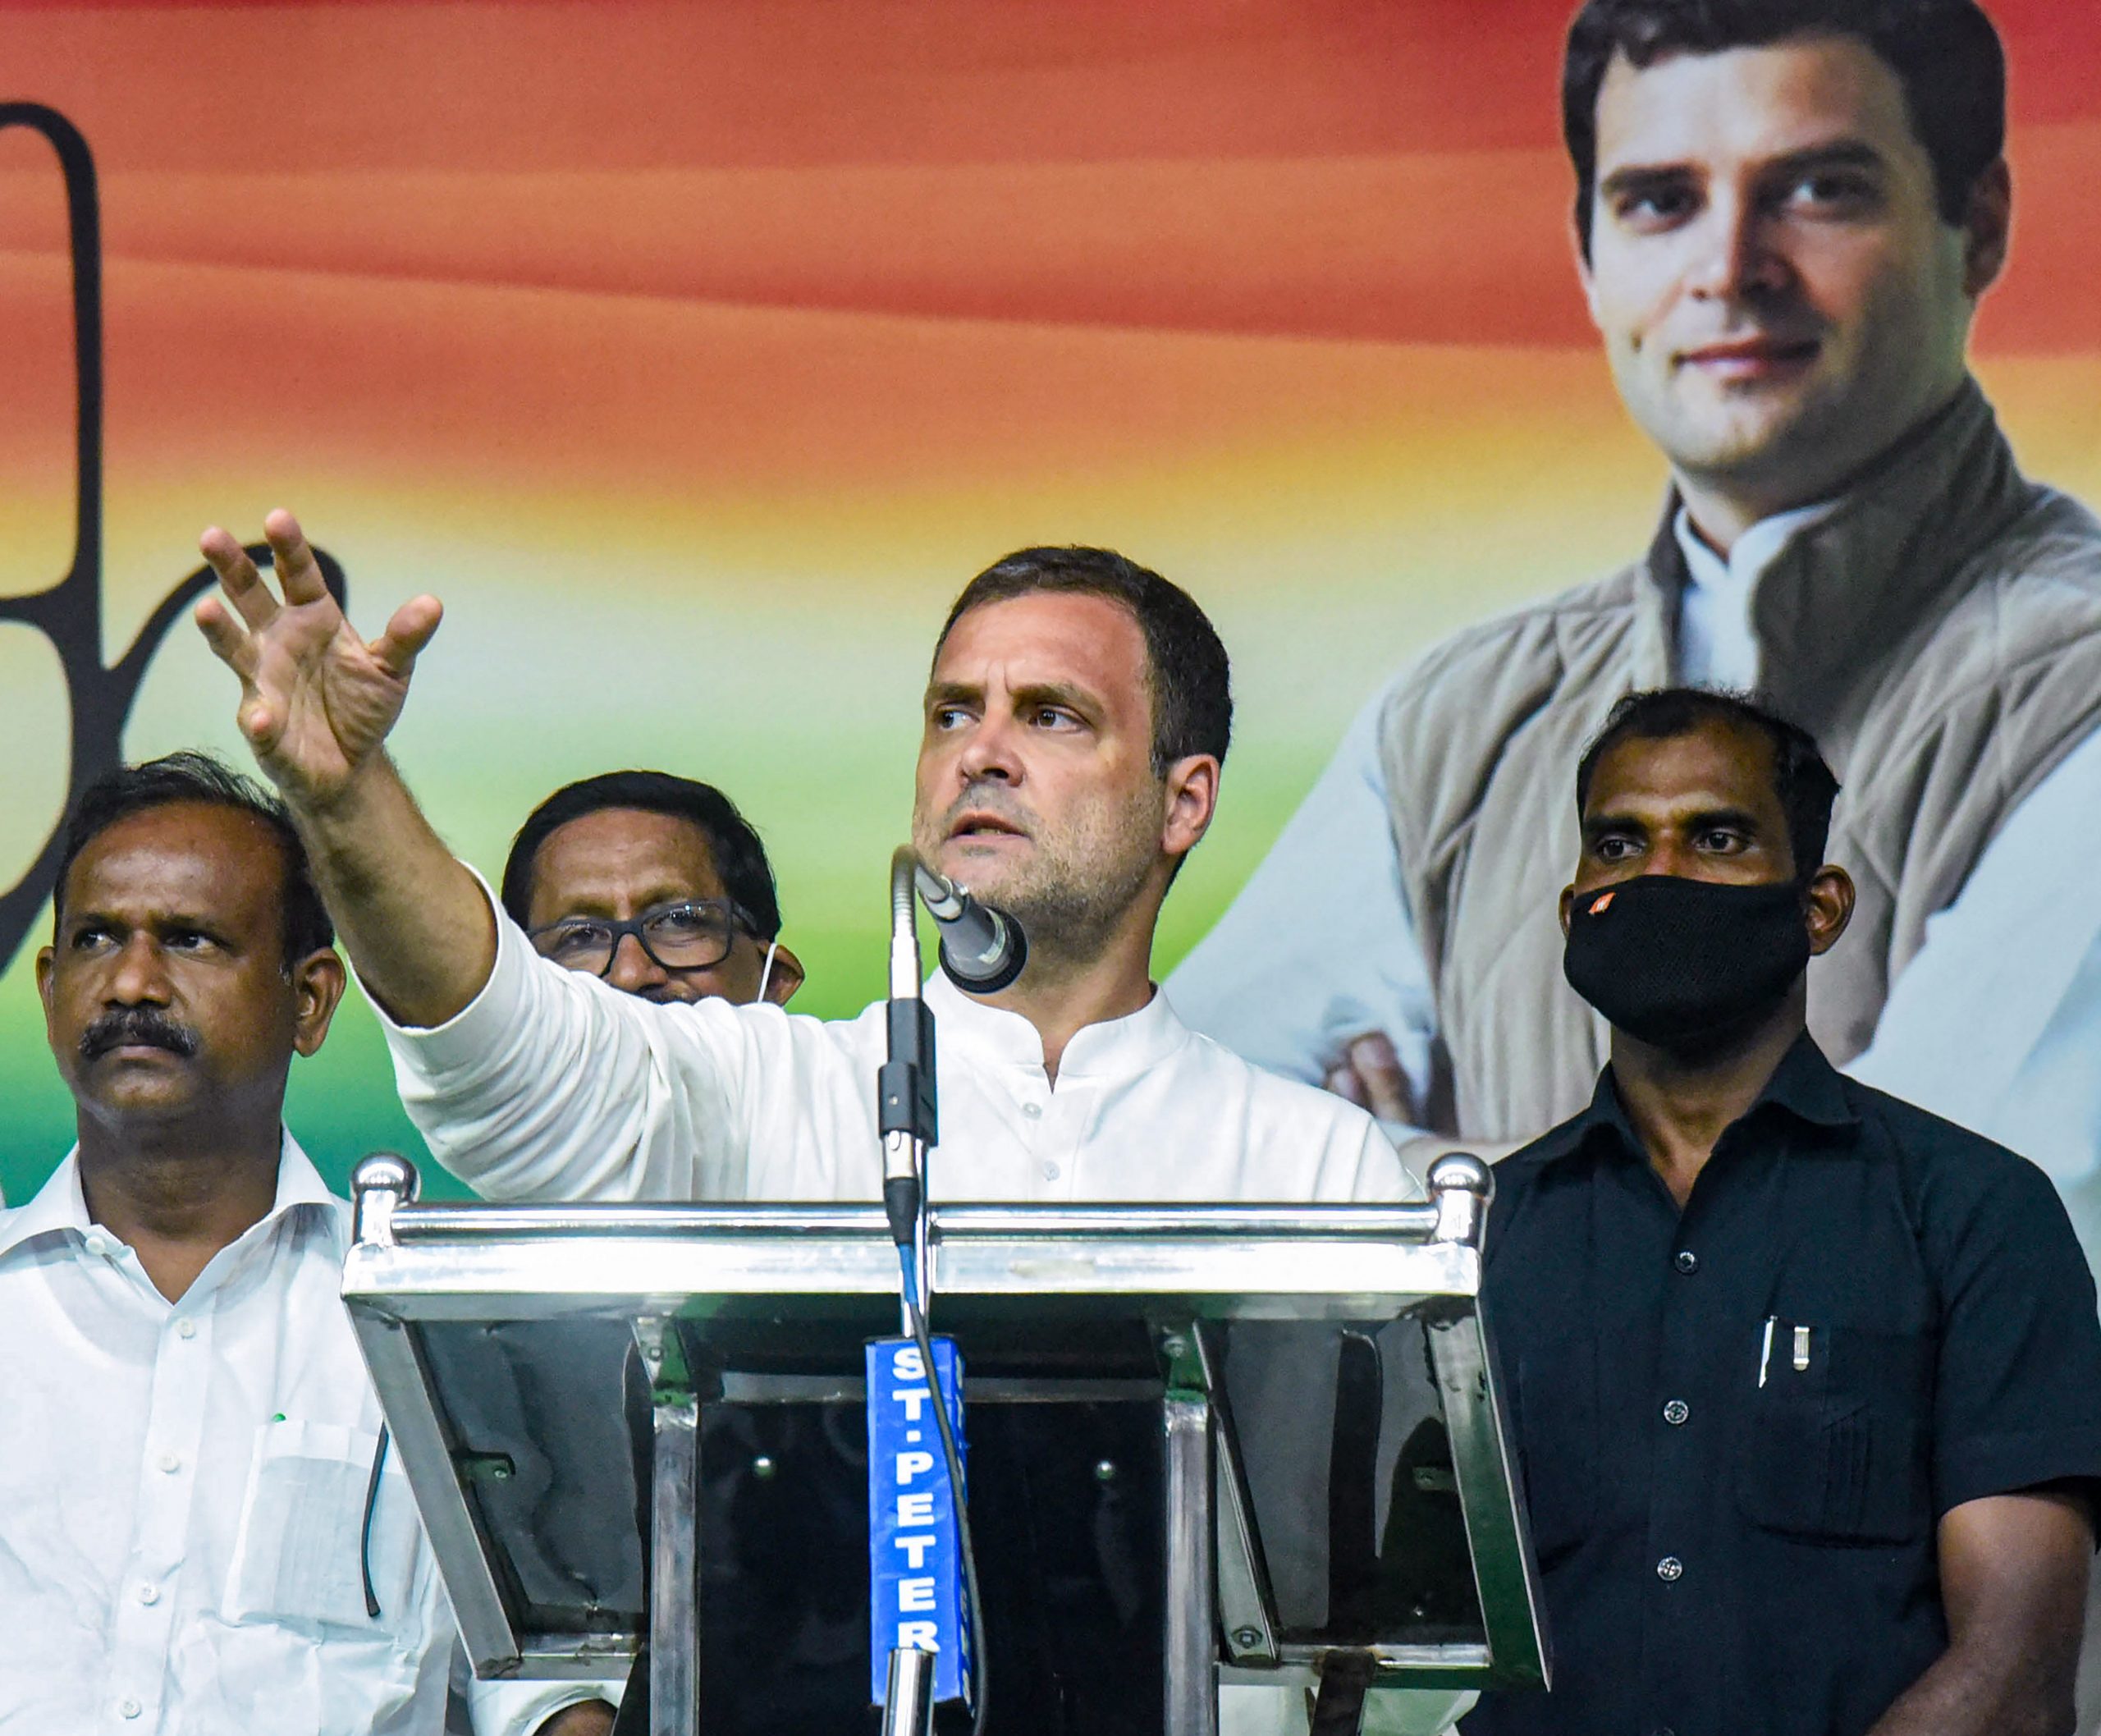 Congress promises free COVID-19 vaccination to Puducherry in poll manifesto